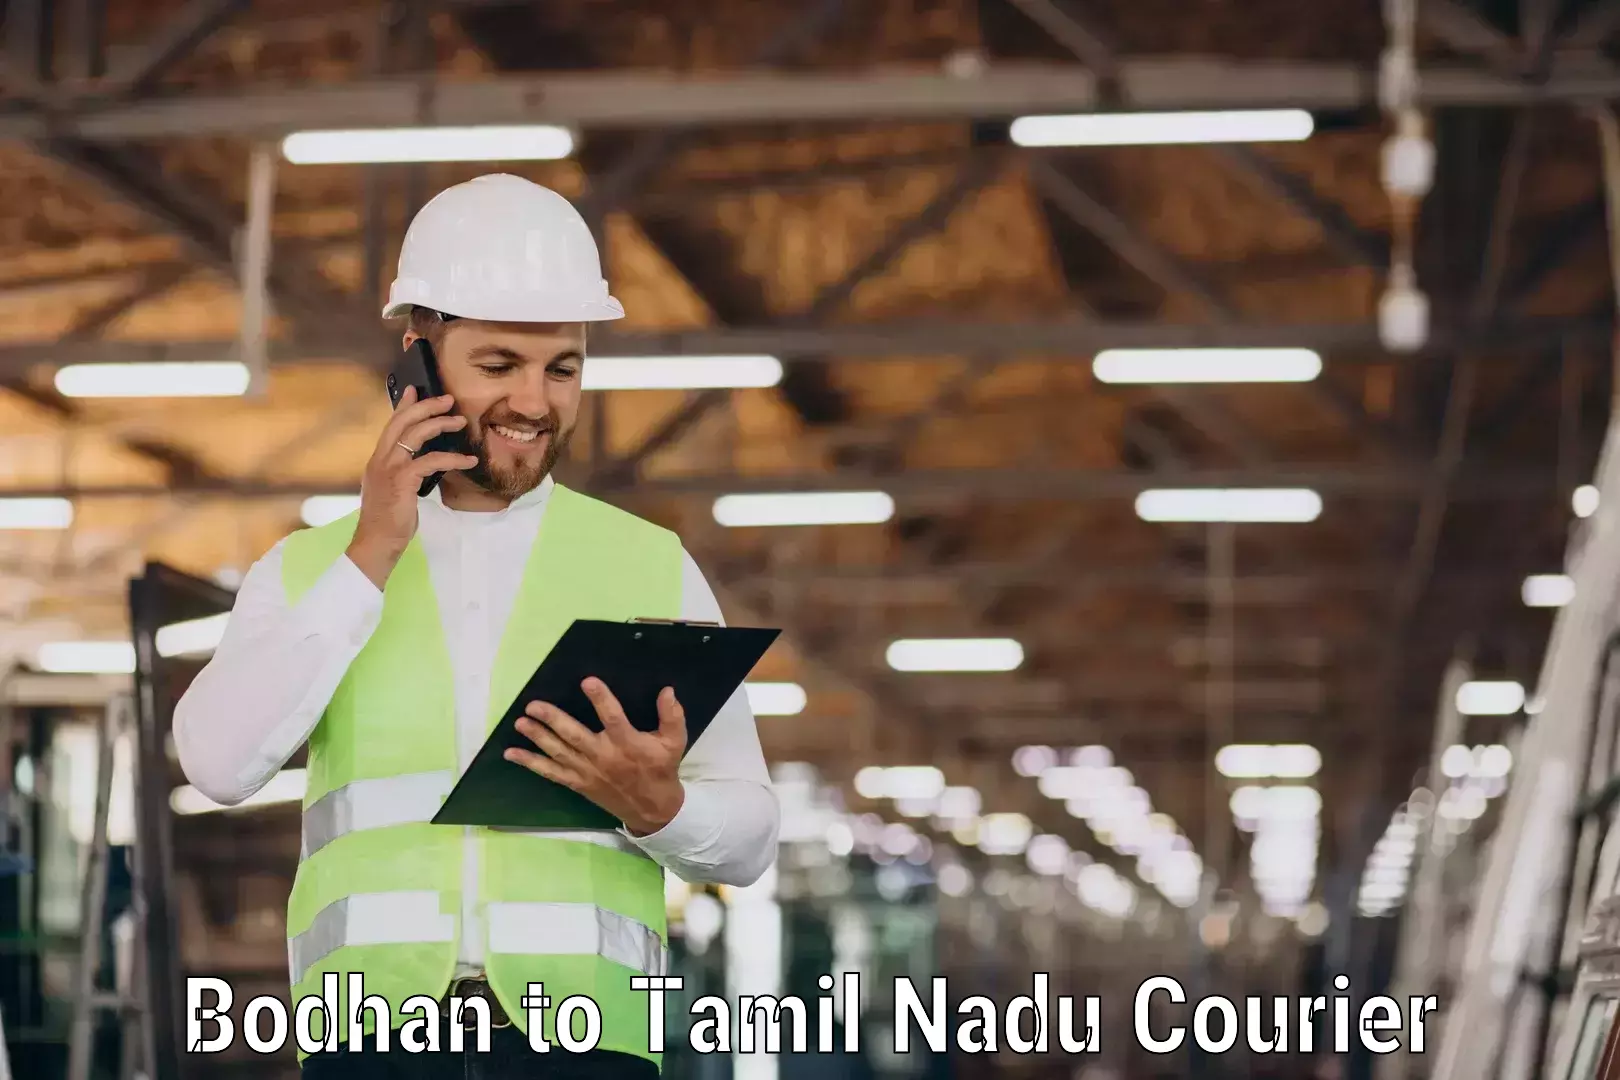 Courier services Bodhan to Mannargudi